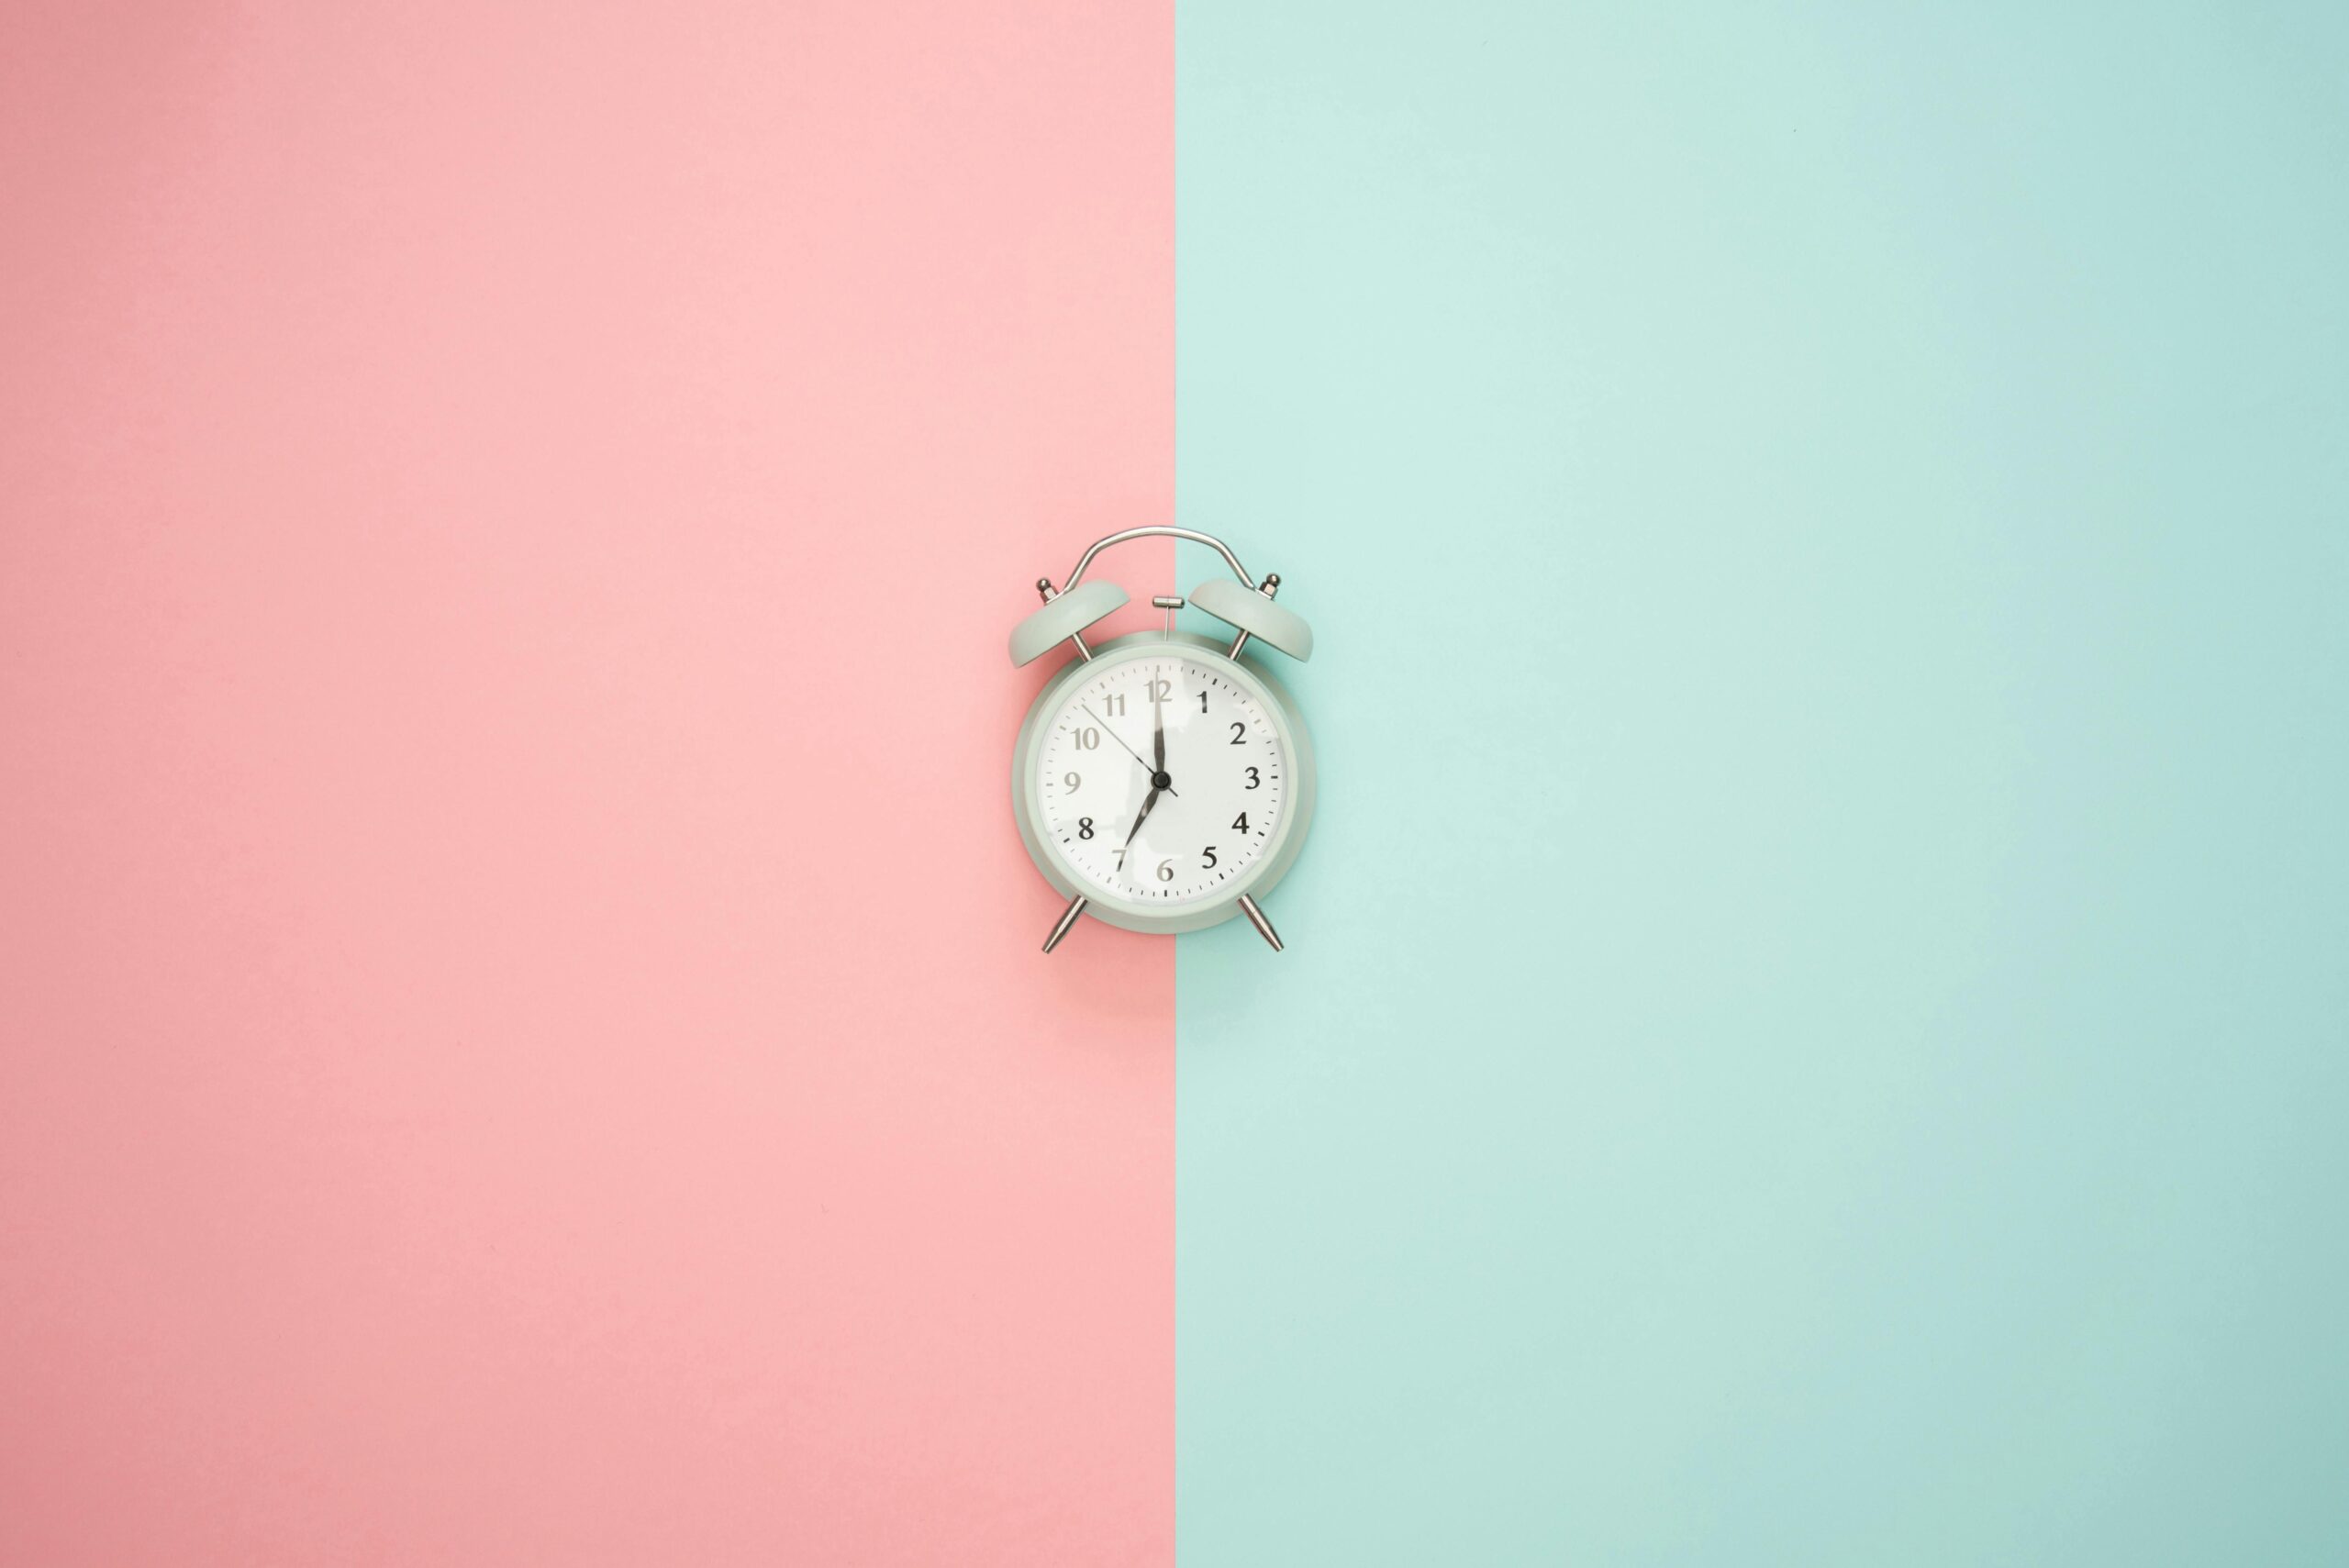 Alarm clock on blue and pink background